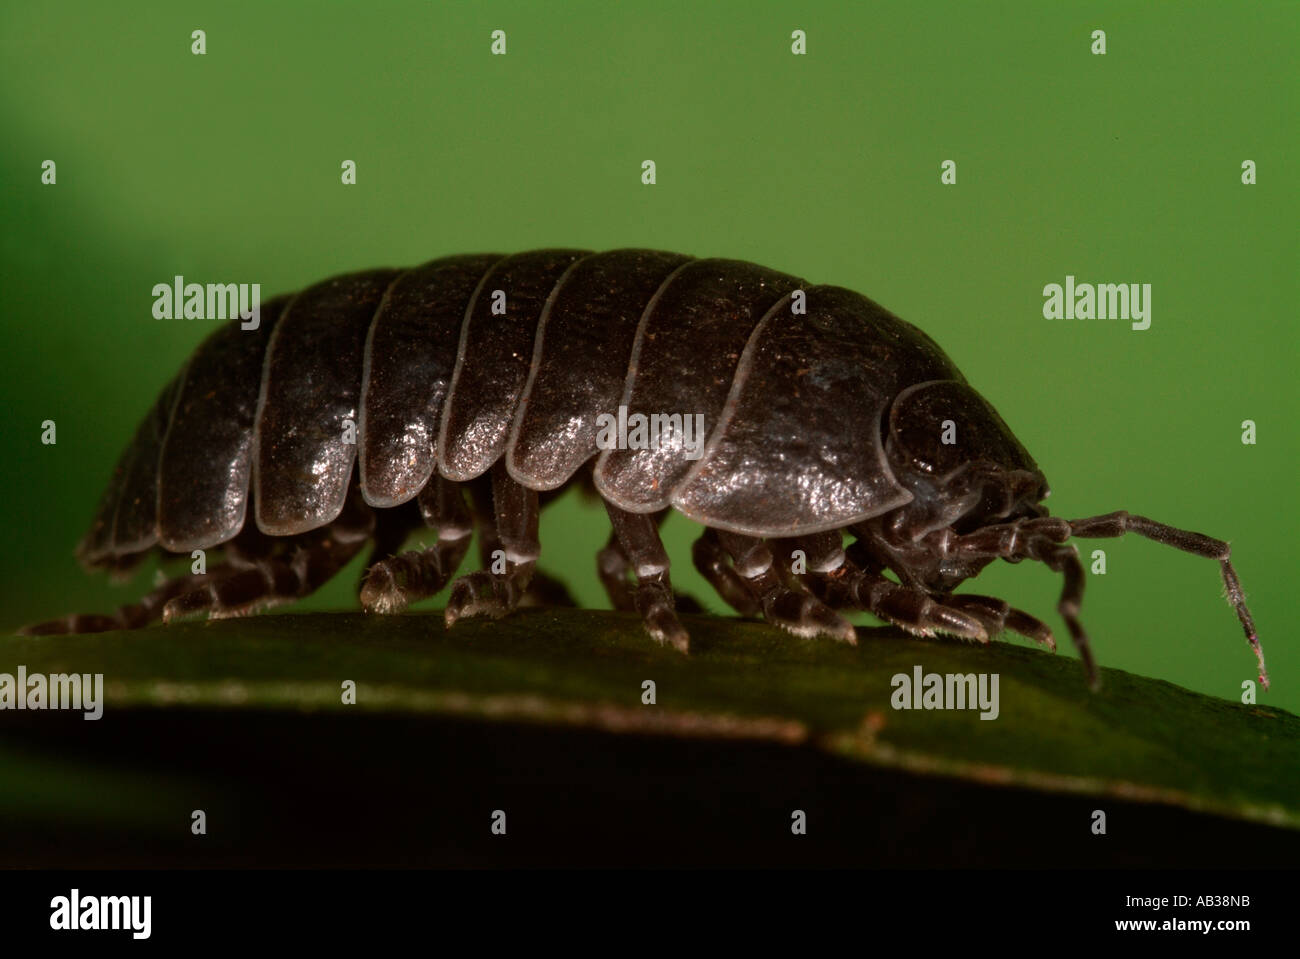 Pill Woodlice or pillbug Armadillidium vulgare side view showing face antennae armour plating and legs United Kingdom Stock Photo